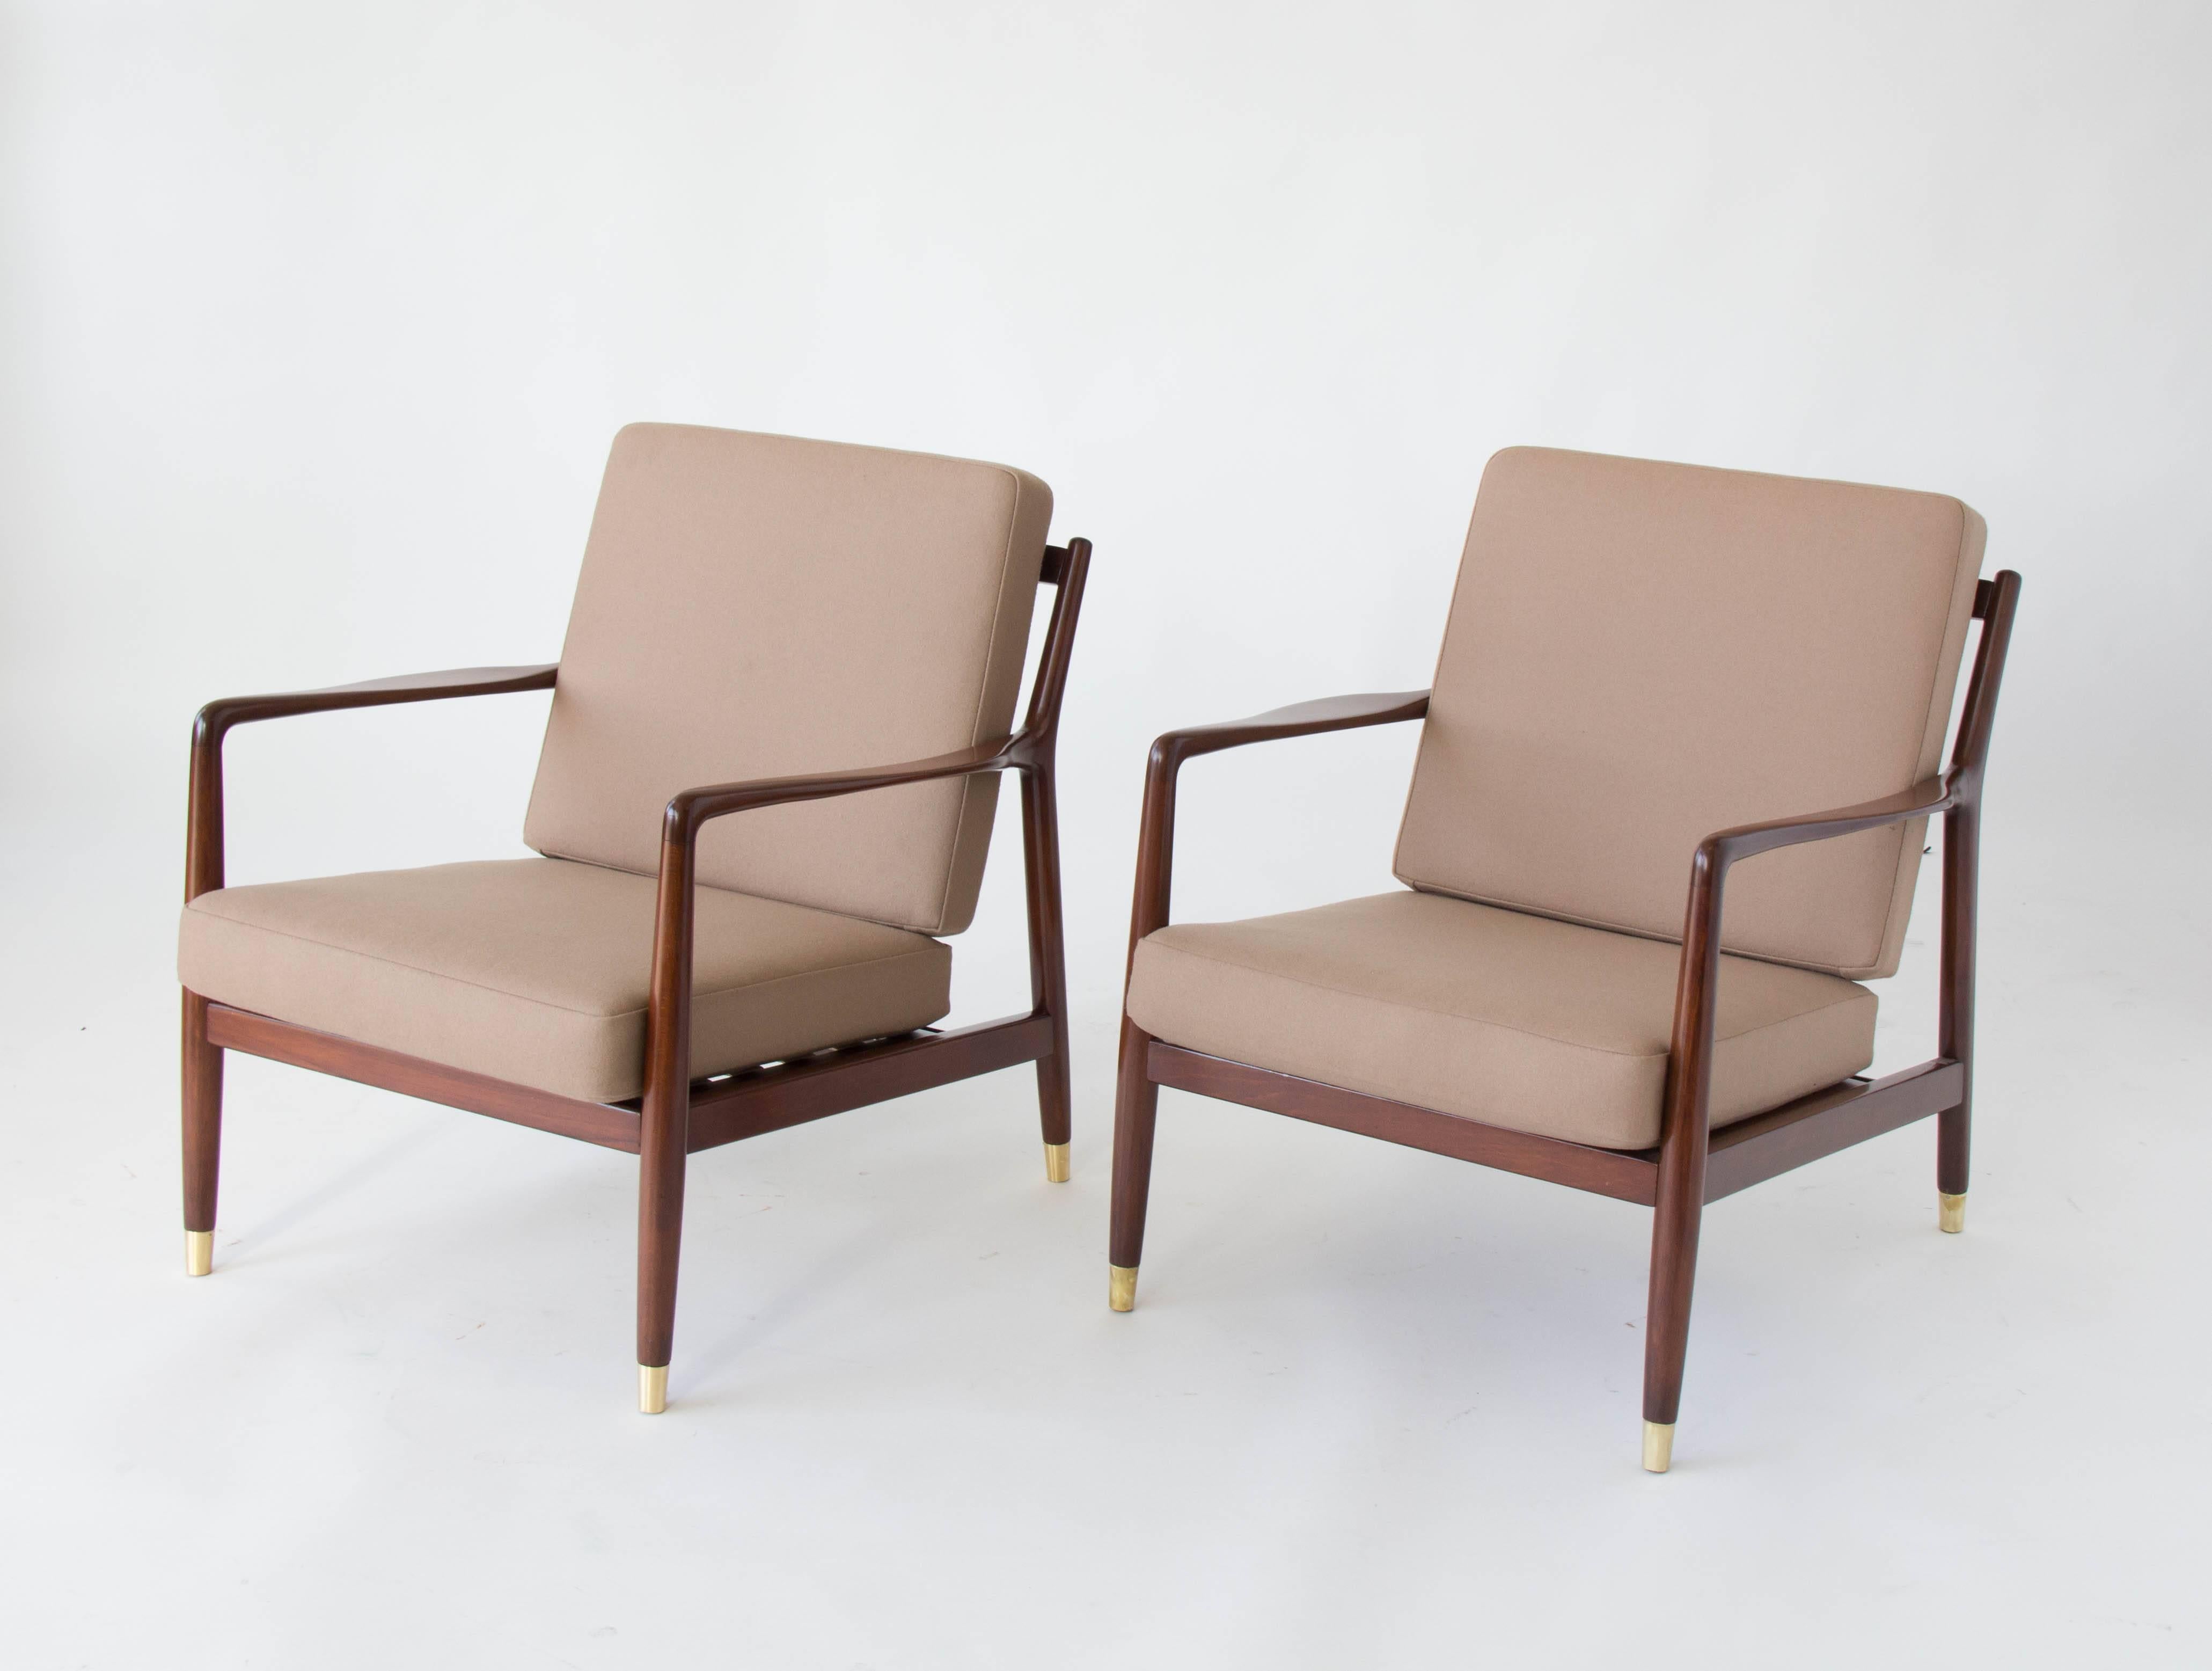 A pair of dark-stained teak lounge chairs designed by Folke Ohlsson and imported to the US under the DUX name. The chair has a deep seat framed by two delicately curved arms and a slatted backrest with a gentle angle. The cushions are covered in a